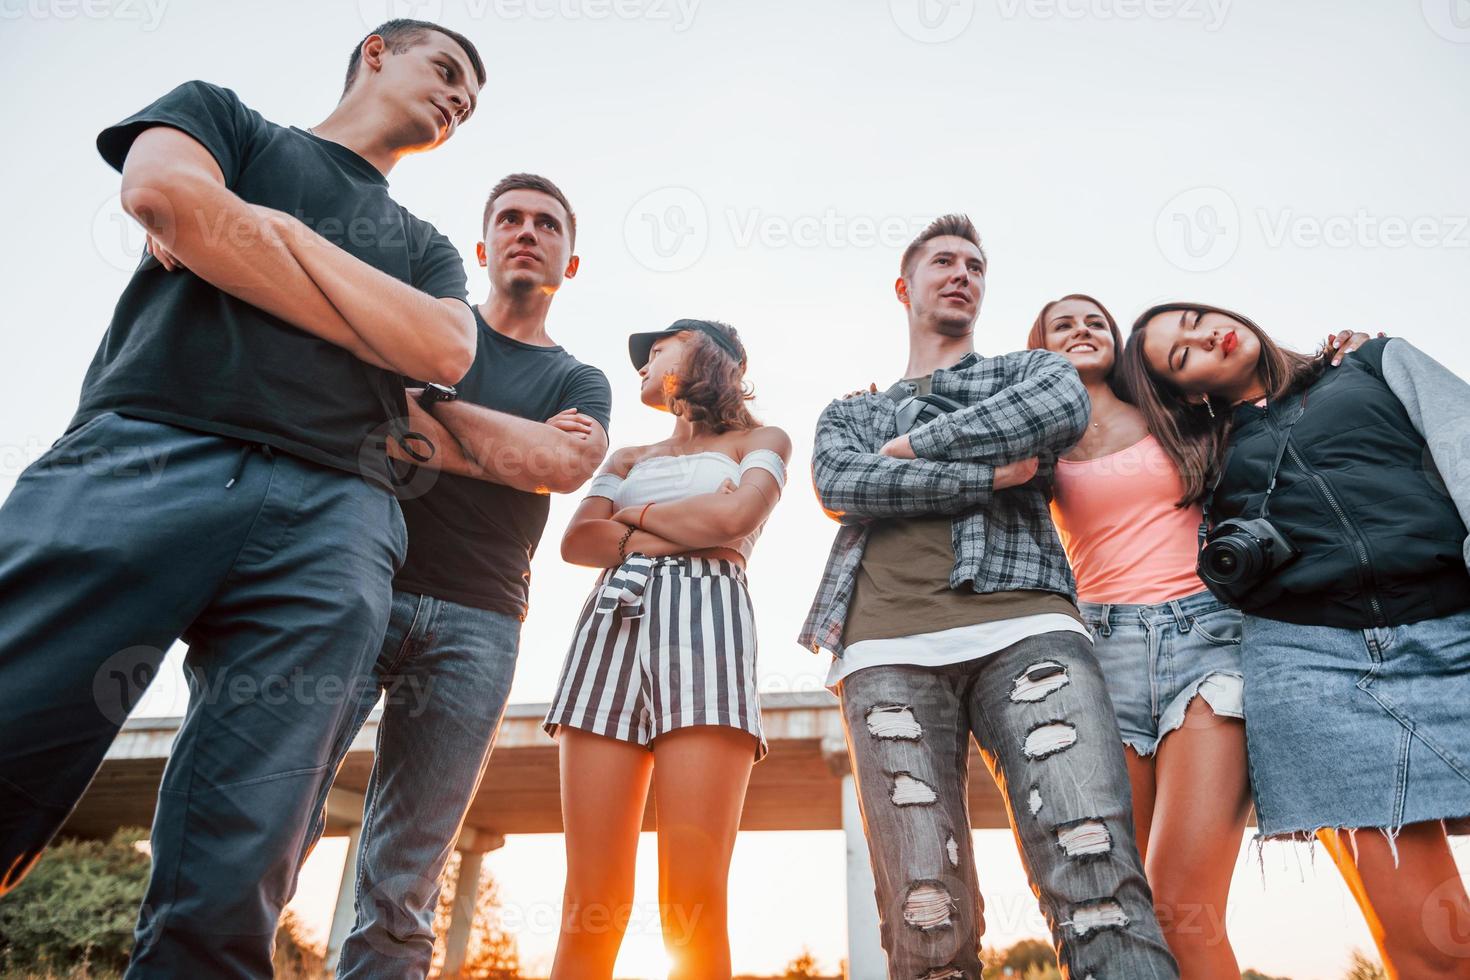 Posing for a camera. Group of young cheerful friends having fun together. Party outdoors photo